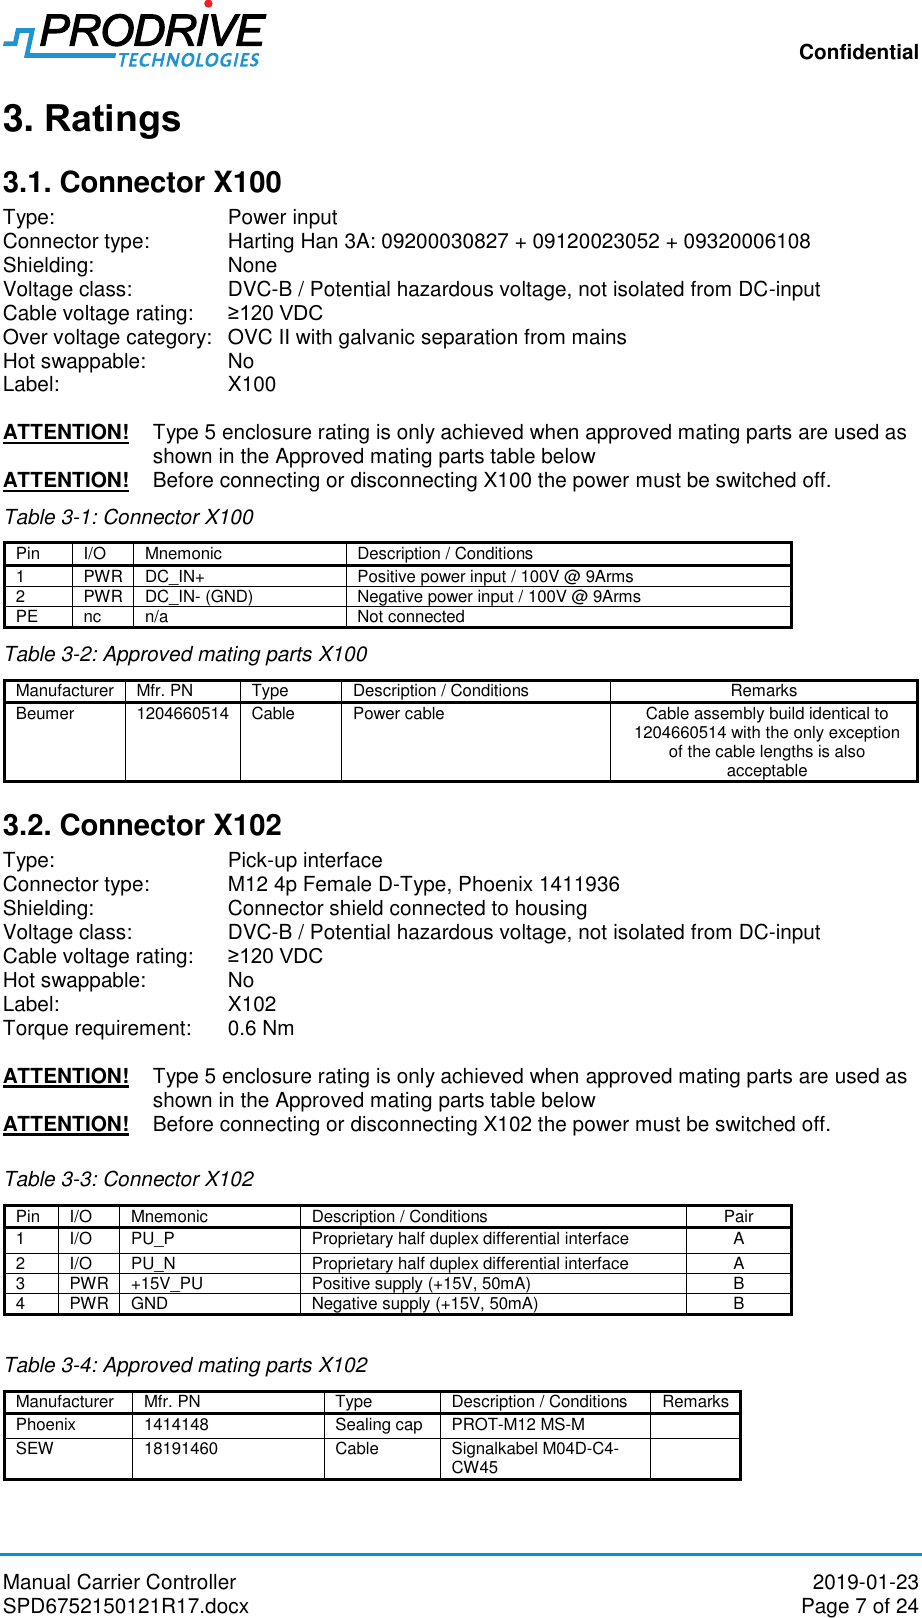 Confidential Manual Carrier Controller  2019-01-23 SPD6752150121R17.docx  Page 7 of 24 3. Ratings 3.1. Connector X100 Type:       Power input Connector type:   Harting Han 3A: 09200030827 + 09120023052 + 09320006108 Shielding:    None Voltage class:    DVC-B / Potential hazardous voltage, not isolated from DC-input Cable voltage rating:   ≥120 VDC Over voltage category:  OVC II with galvanic separation from mains Hot swappable:   No Label:       X100  ATTENTION!  Type 5 enclosure rating is only achieved when approved mating parts are used as shown in the Approved mating parts table below  ATTENTION!  Before connecting or disconnecting X100 the power must be switched off. Table 3-1: Connector X100 Pin I/O Mnemonic Description / Conditions 1 PWR DC_IN+ Positive power input / 100V @ 9Arms 2 PWR DC_IN- (GND) Negative power input / 100V @ 9Arms PE nc n/a Not connected Table 3-2: Approved mating parts X100 Manufacturer Mfr. PN Type Description / Conditions Remarks Beumer 1204660514  Cable Power cable Cable assembly build identical to 1204660514 with the only exception of the cable lengths is also acceptable 3.2. Connector X102 Type:       Pick-up interface Connector type:   M12 4p Female D-Type, Phoenix 1411936 Shielding:    Connector shield connected to housing Voltage class:    DVC-B / Potential hazardous voltage, not isolated from DC-input Cable voltage rating:   ≥120 VDC Hot swappable:   No Label:       X102 Torque requirement:  0.6 Nm  ATTENTION!  Type 5 enclosure rating is only achieved when approved mating parts are used as shown in the Approved mating parts table below  ATTENTION!  Before connecting or disconnecting X102 the power must be switched off.  Table 3-3: Connector X102 Pin I/O Mnemonic Description / Conditions Pair 1 I/O PU_P Proprietary half duplex differential interface A 2 I/O PU_N Proprietary half duplex differential interface A 3 PWR +15V_PU Positive supply (+15V, 50mA) B 4 PWR GND Negative supply (+15V, 50mA) B  Table 3-4: Approved mating parts X102 Manufacturer Mfr. PN Type Description / Conditions Remarks Phoenix 1414148 Sealing cap PROT-M12 MS-M  SEW 18191460 Cable Signalkabel M04D-C4-CW45         